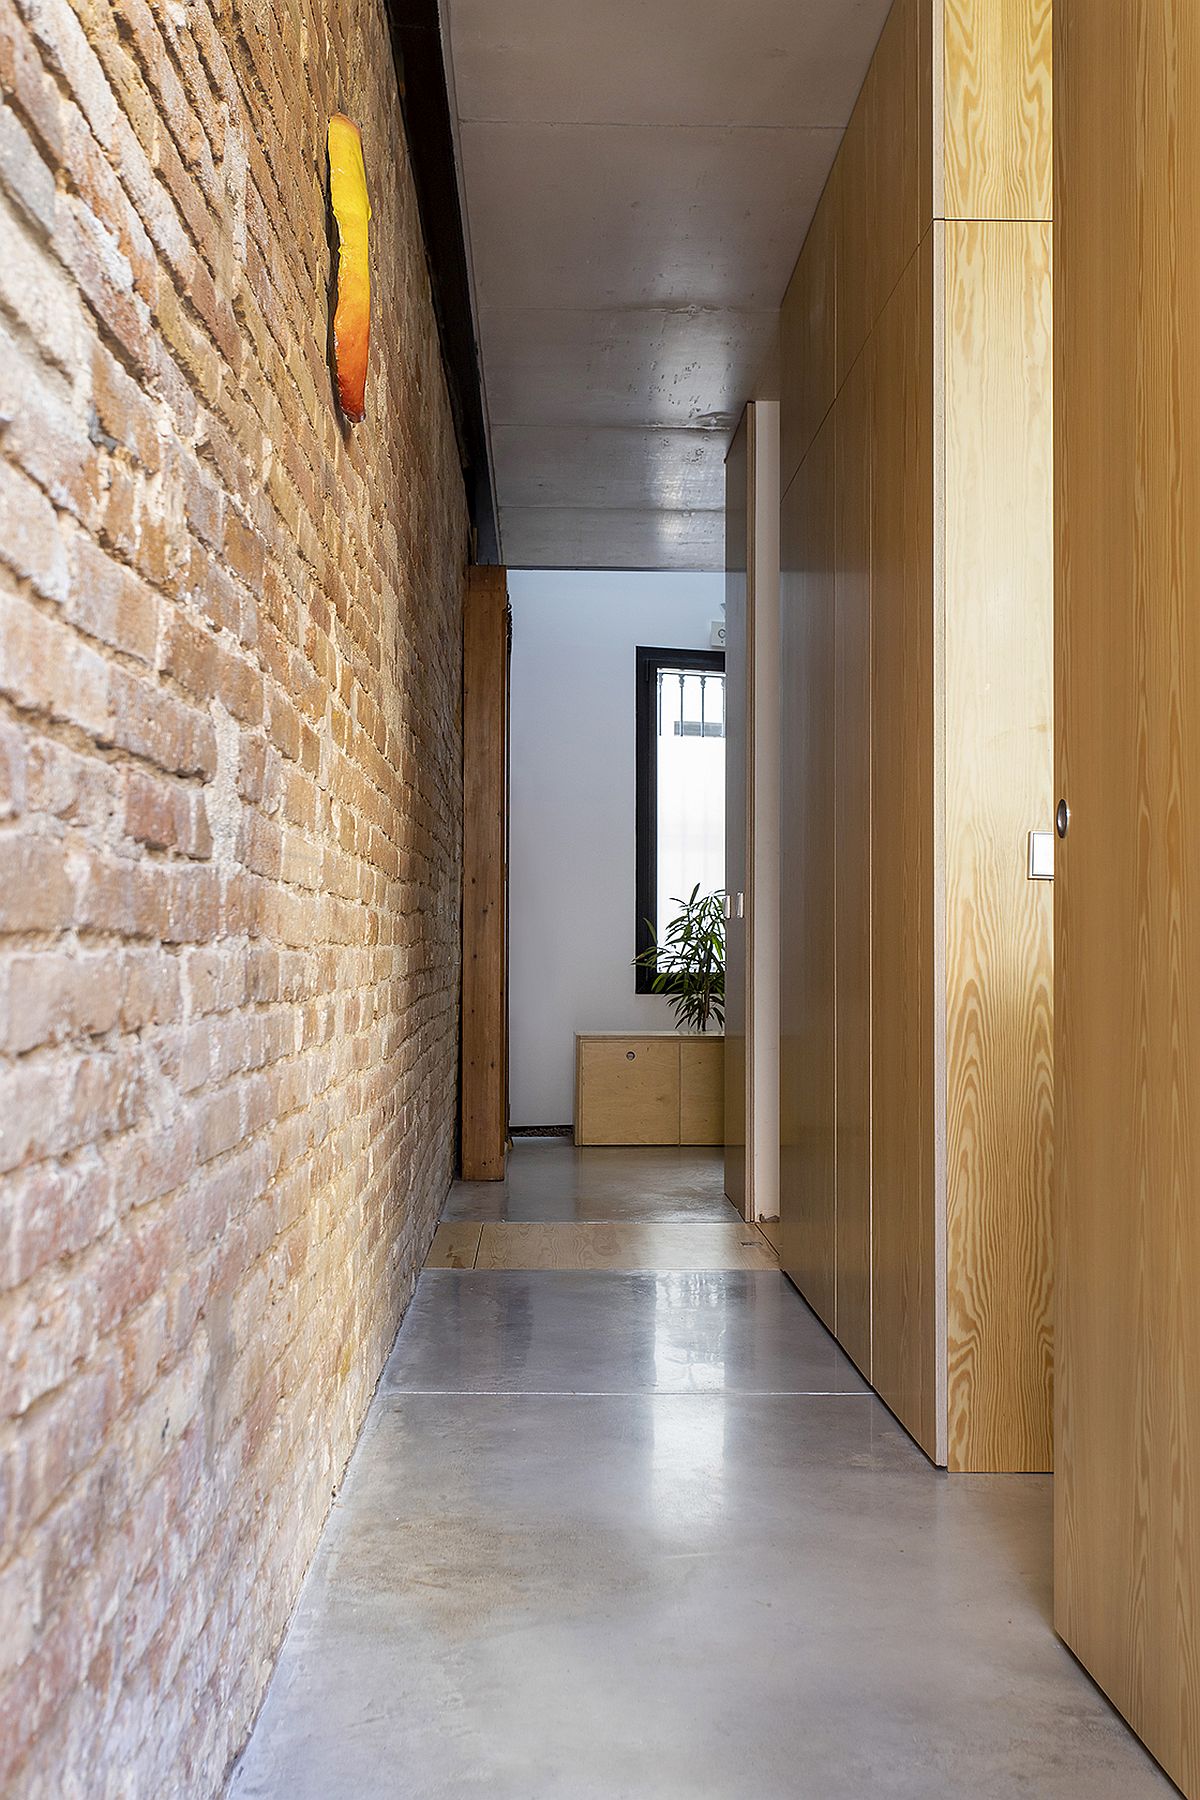 Corridor-leading-to-different-rooms-inside-the-house-24599